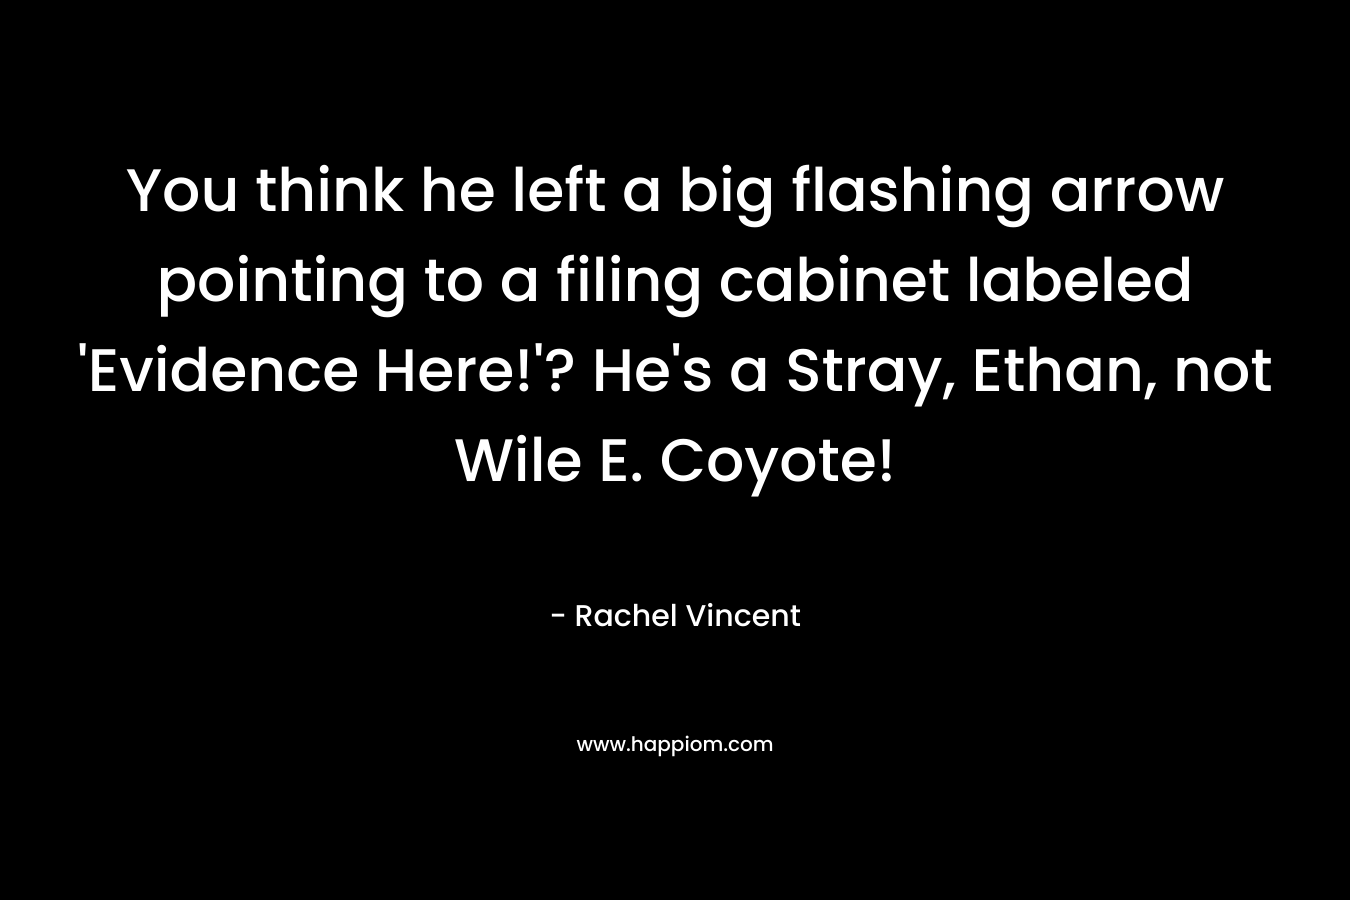 You think he left a big flashing arrow pointing to a filing cabinet labeled 'Evidence Here!'? He's a Stray, Ethan, not Wile E. Coyote!